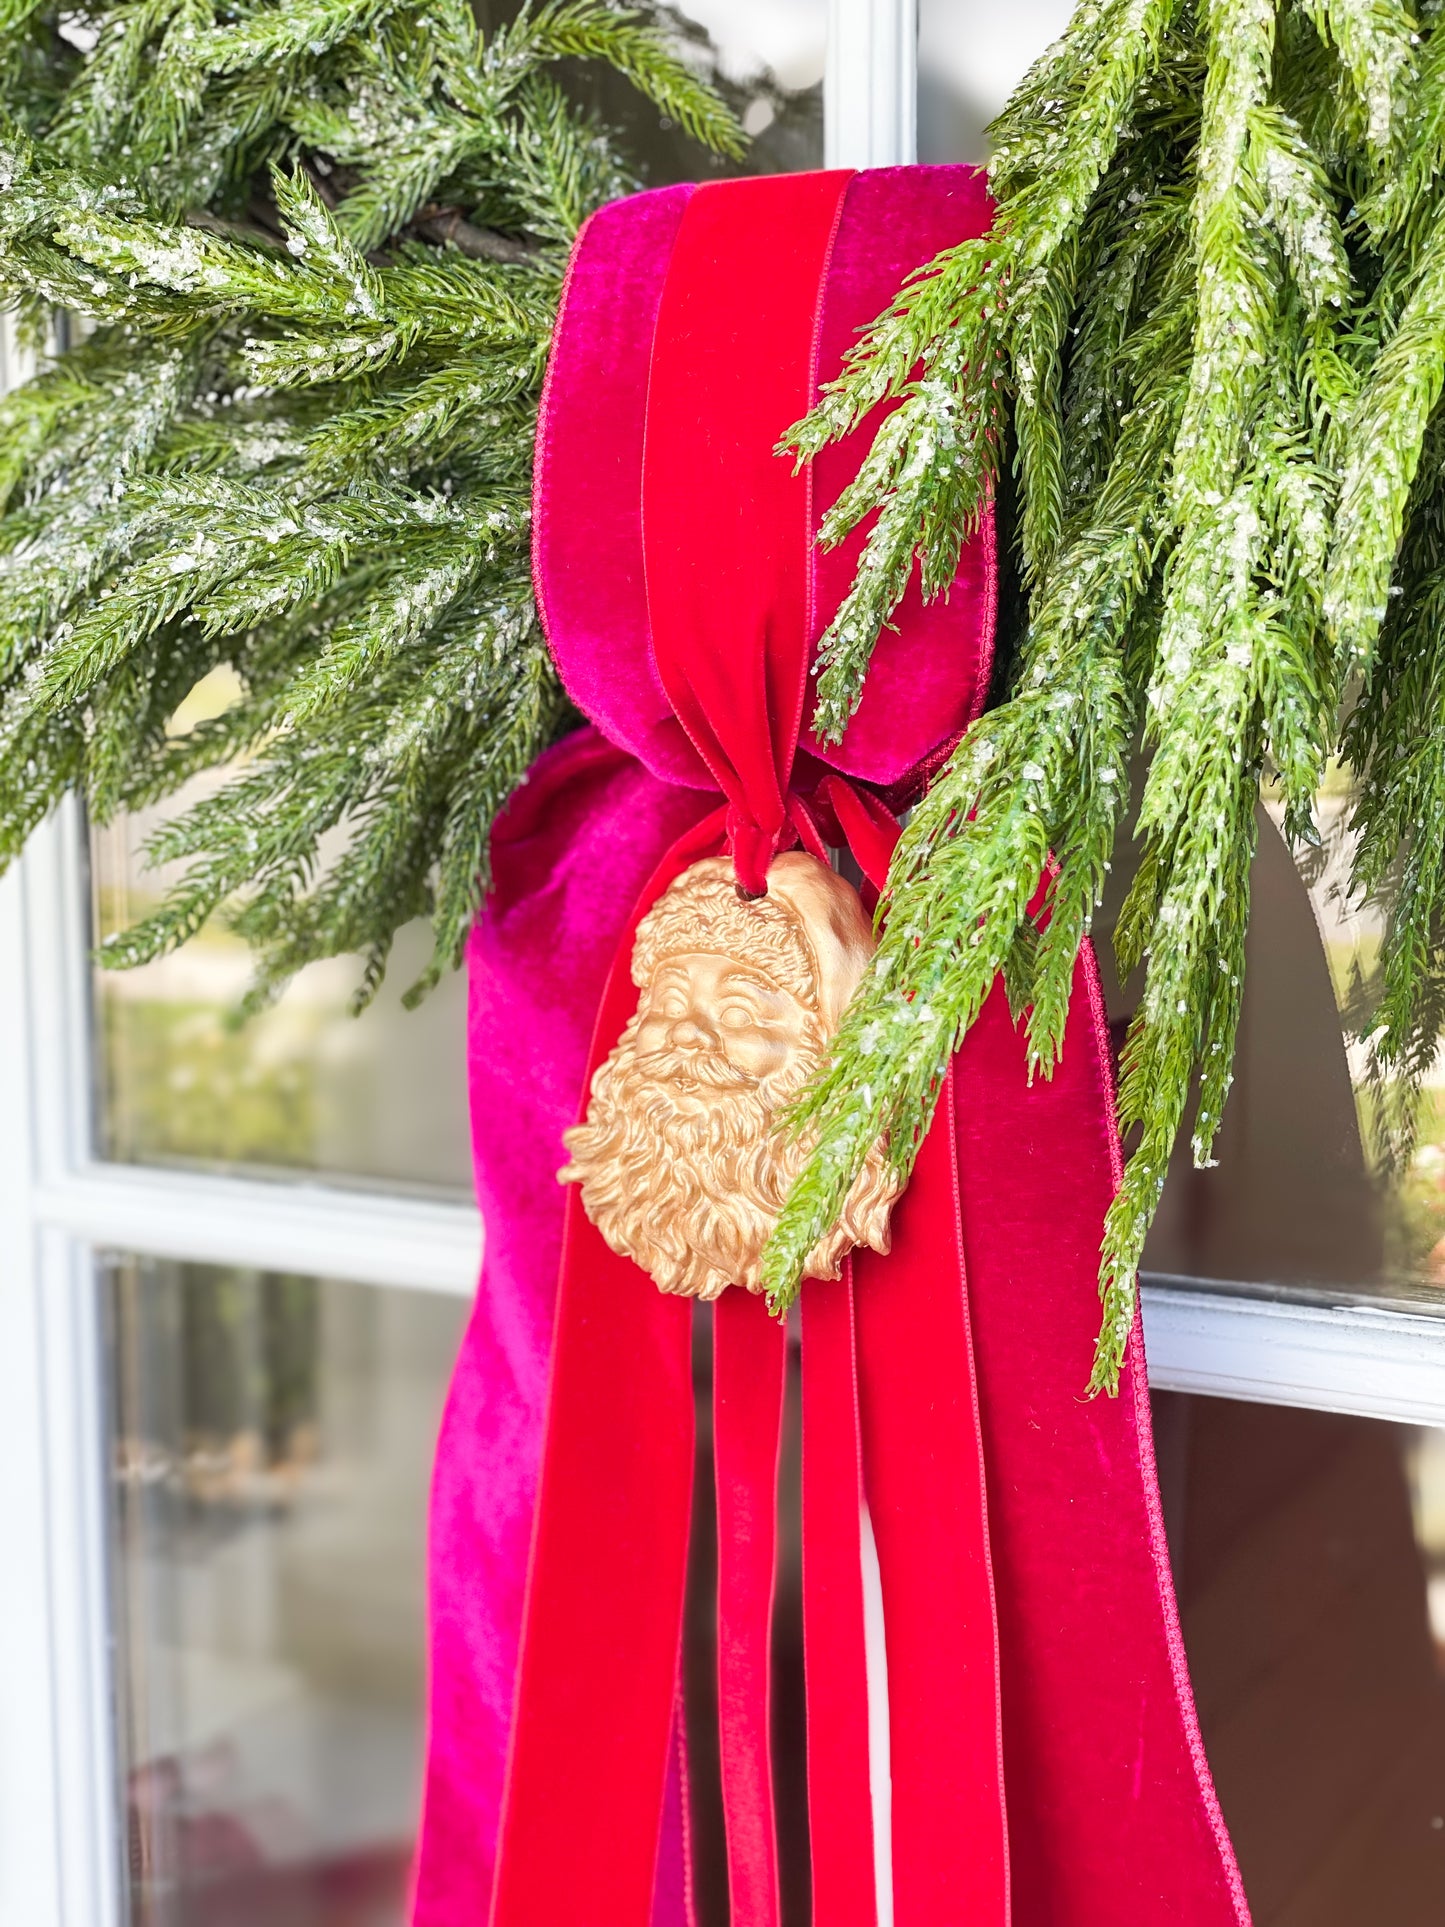 The Hot Pink Believe Iced Fir Pine Wreath With Sash And Santa